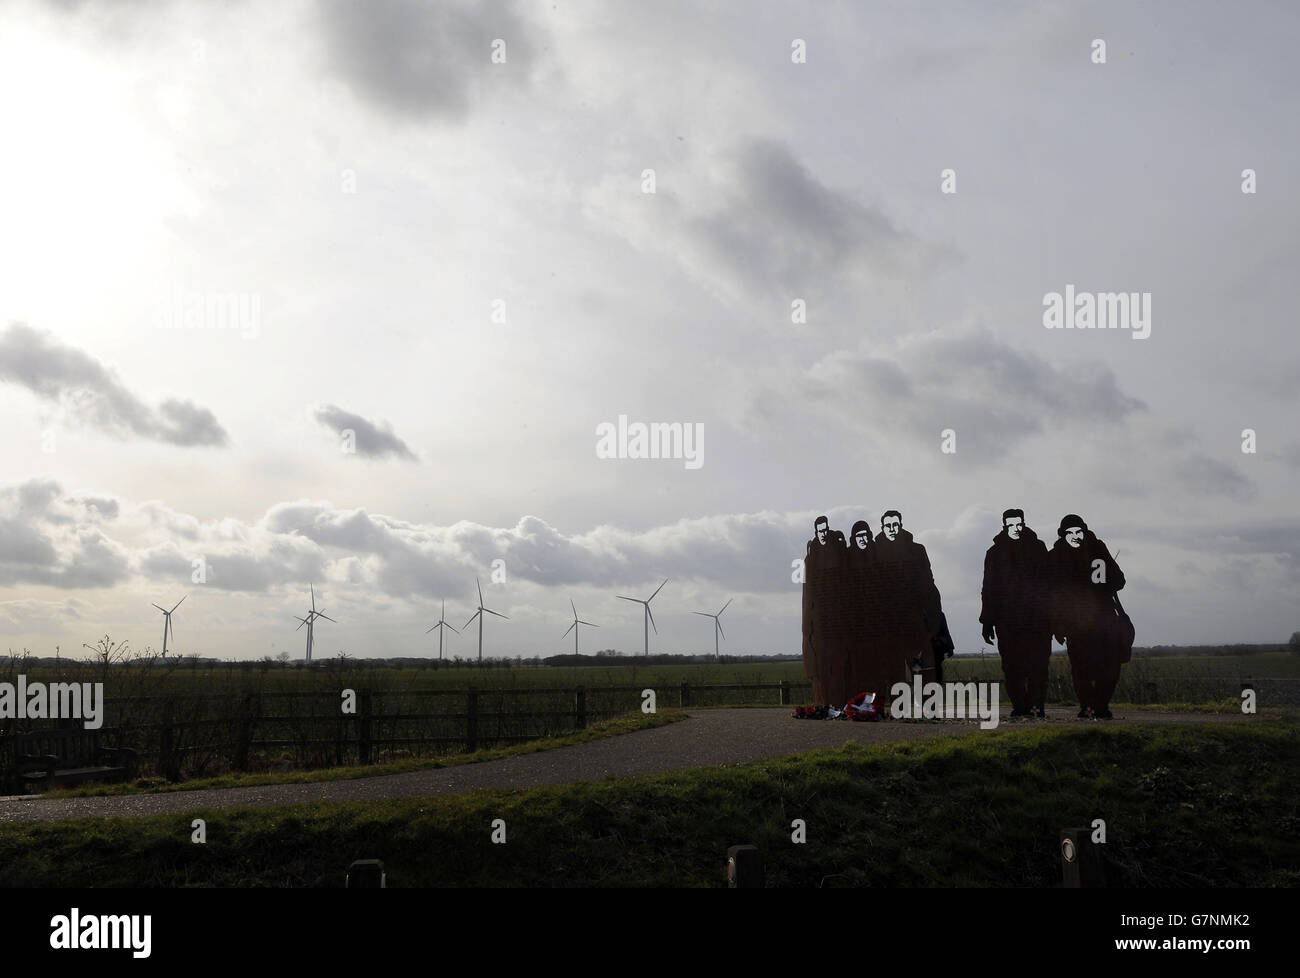 STANDALONE Photo. A wind farm on the old wartime airfield at Lissett in East Yorkshire, a backdrop to a memorial to the 851 bomber crew from 158 Squadron who died on active service, who were based at the Bomber Command airfield in World War Two. Stock Photo